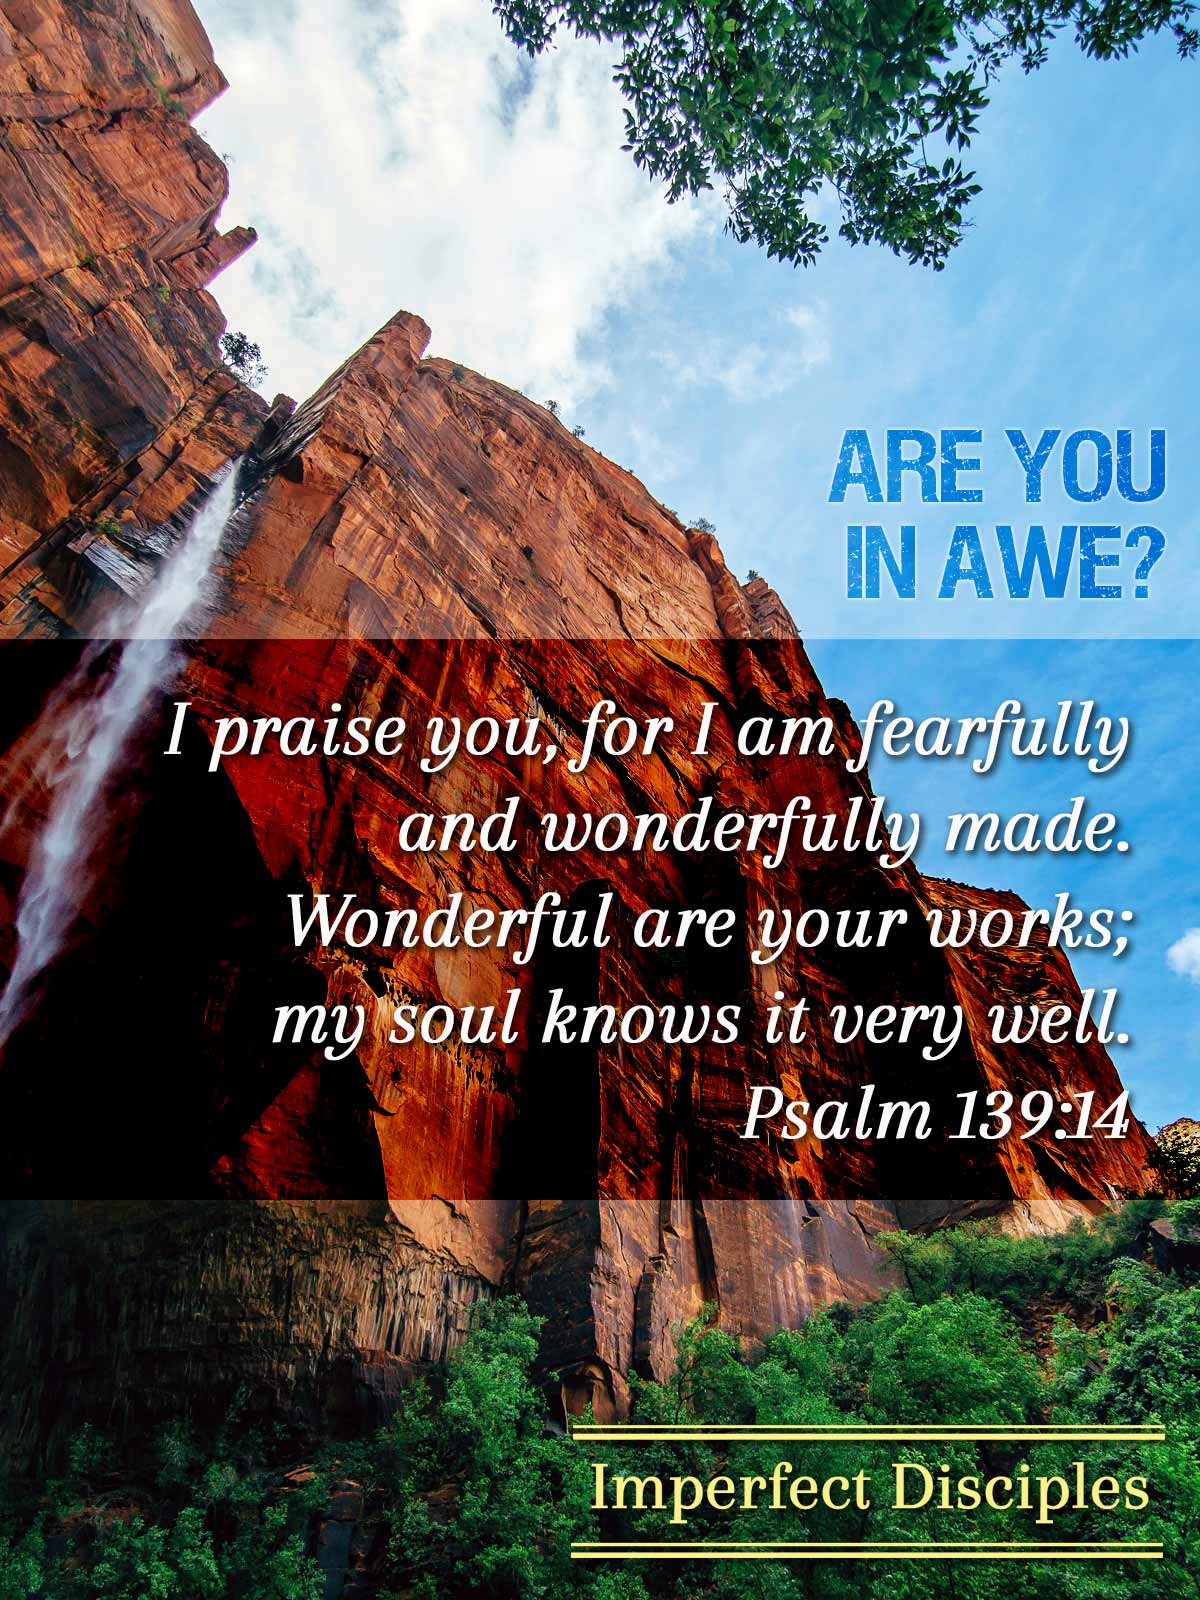 Are You in Awe? Psalm 139:14